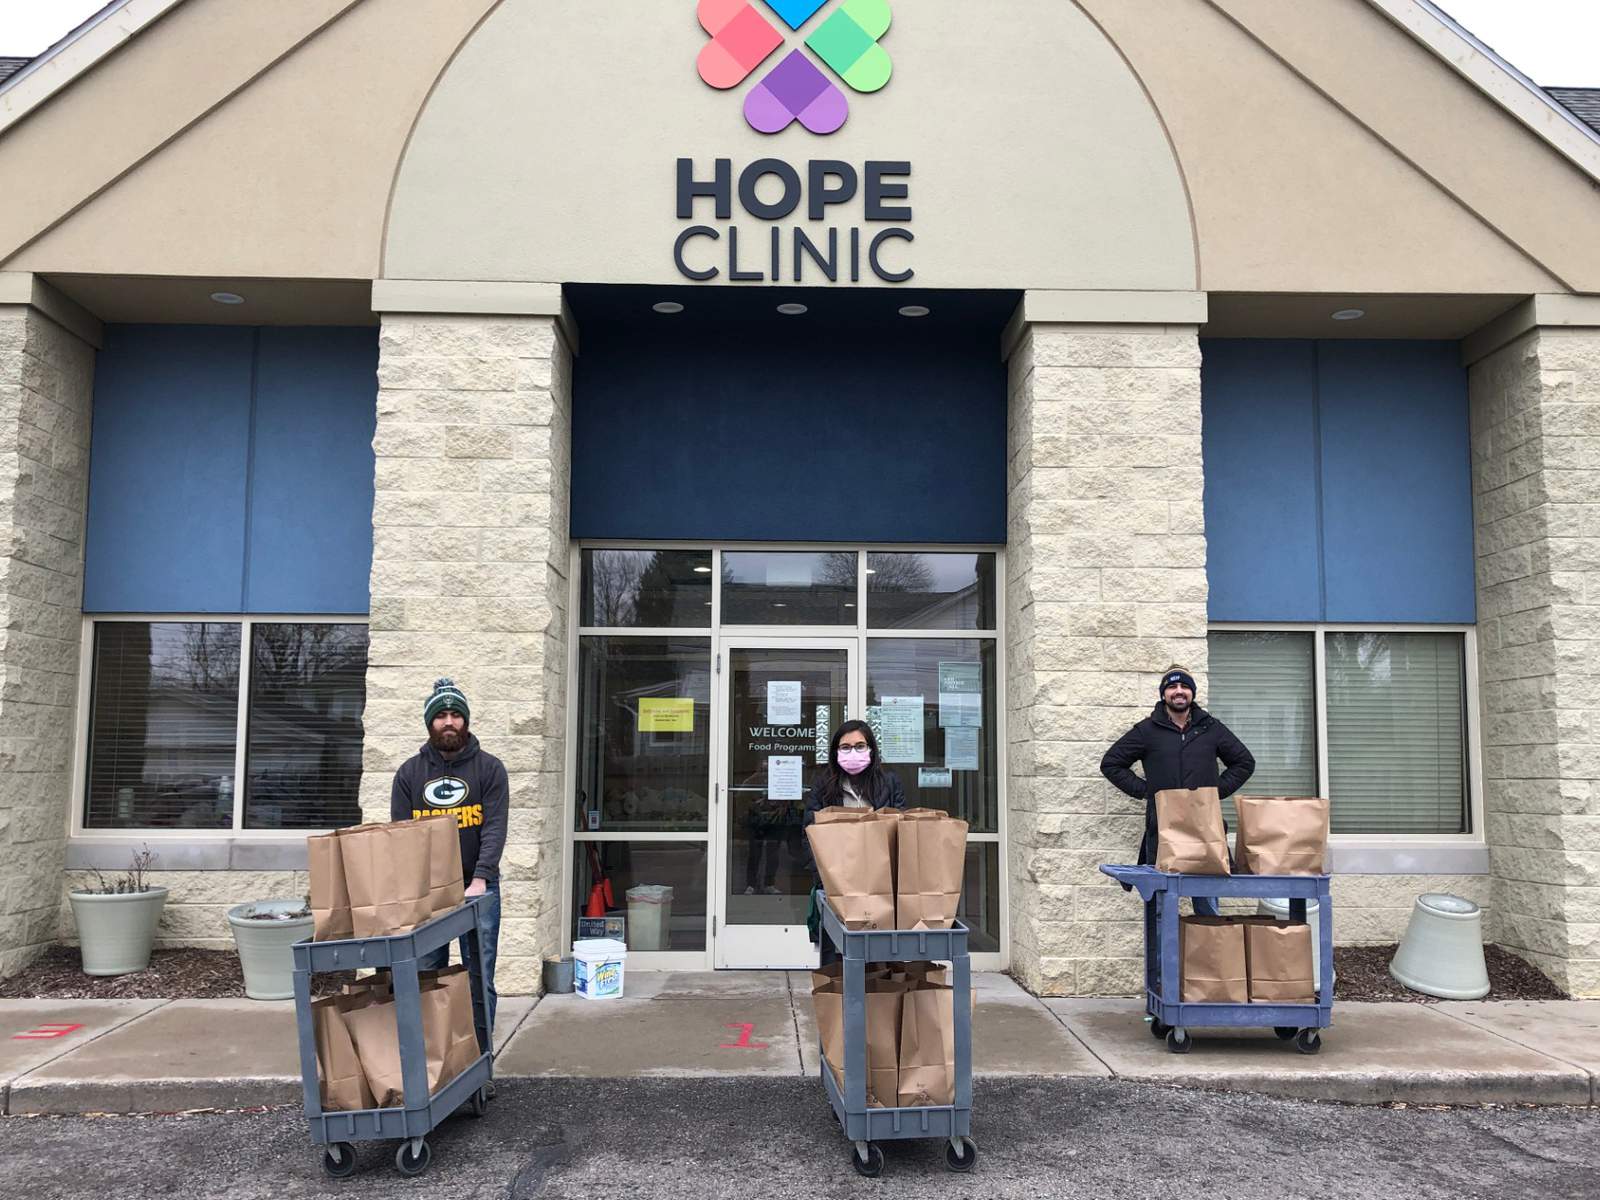 University of Michigan students team up with Hope Clinic to help deliver food to homebound